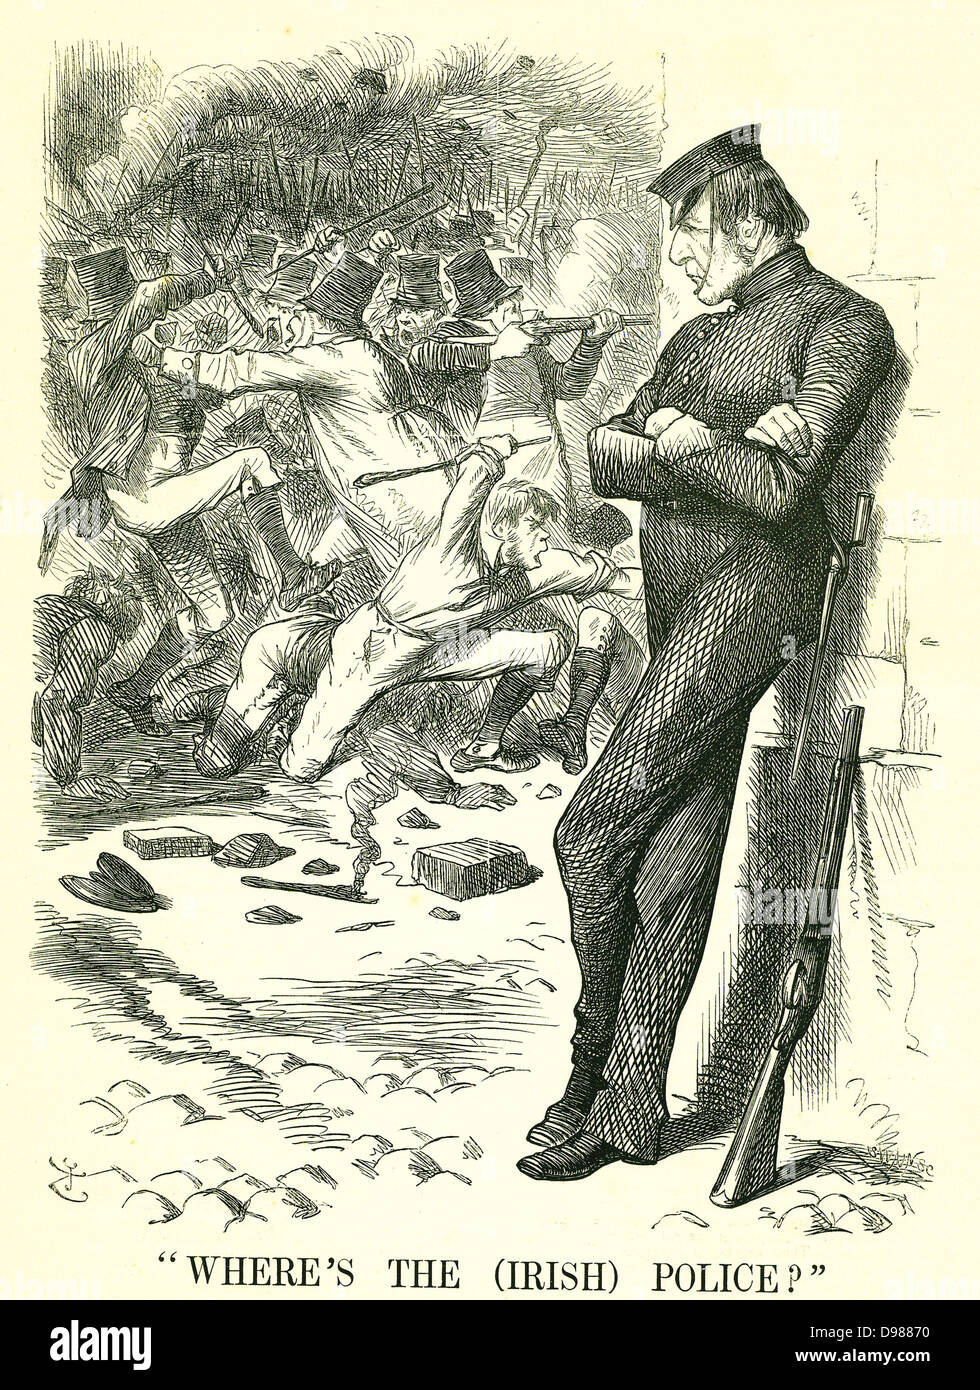 Where's the (Irish) Police?': William Gladstone, British Prime Minister, watching the unrest in Ireland and waiting to intervene. In April a new Irish Peace Preservation Act was passed by Parliament. John Tenniel cartoon from 'Punch', London, 12 March 1870. Stock Photo